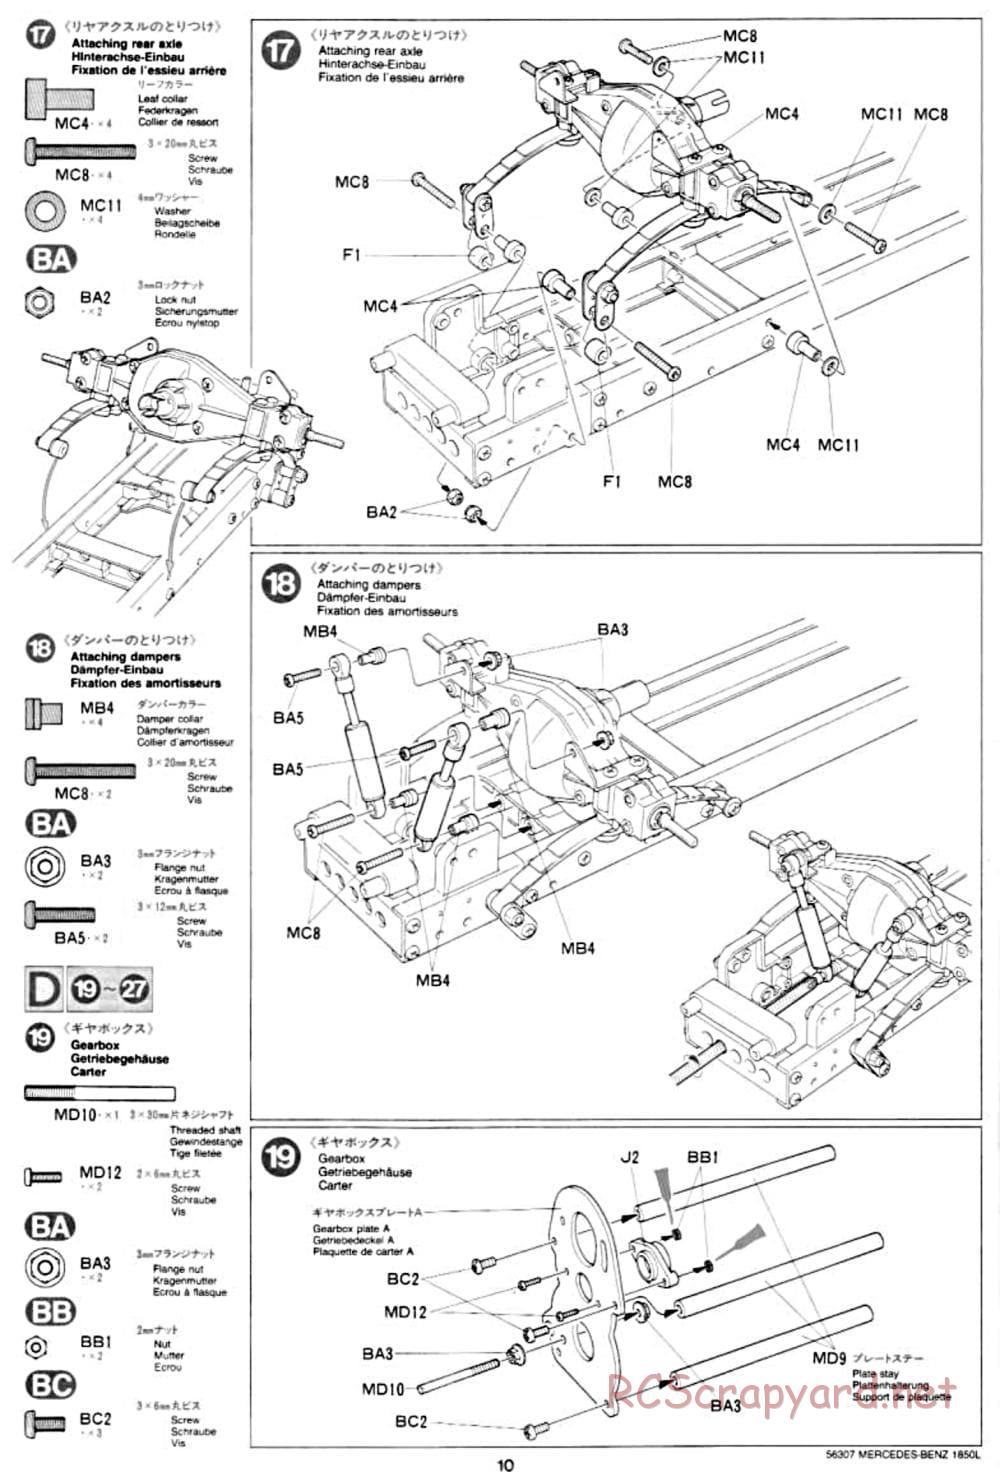 Tamiya - Mercedes-Benz 1850L Delivery Truck - Manual - Page 10